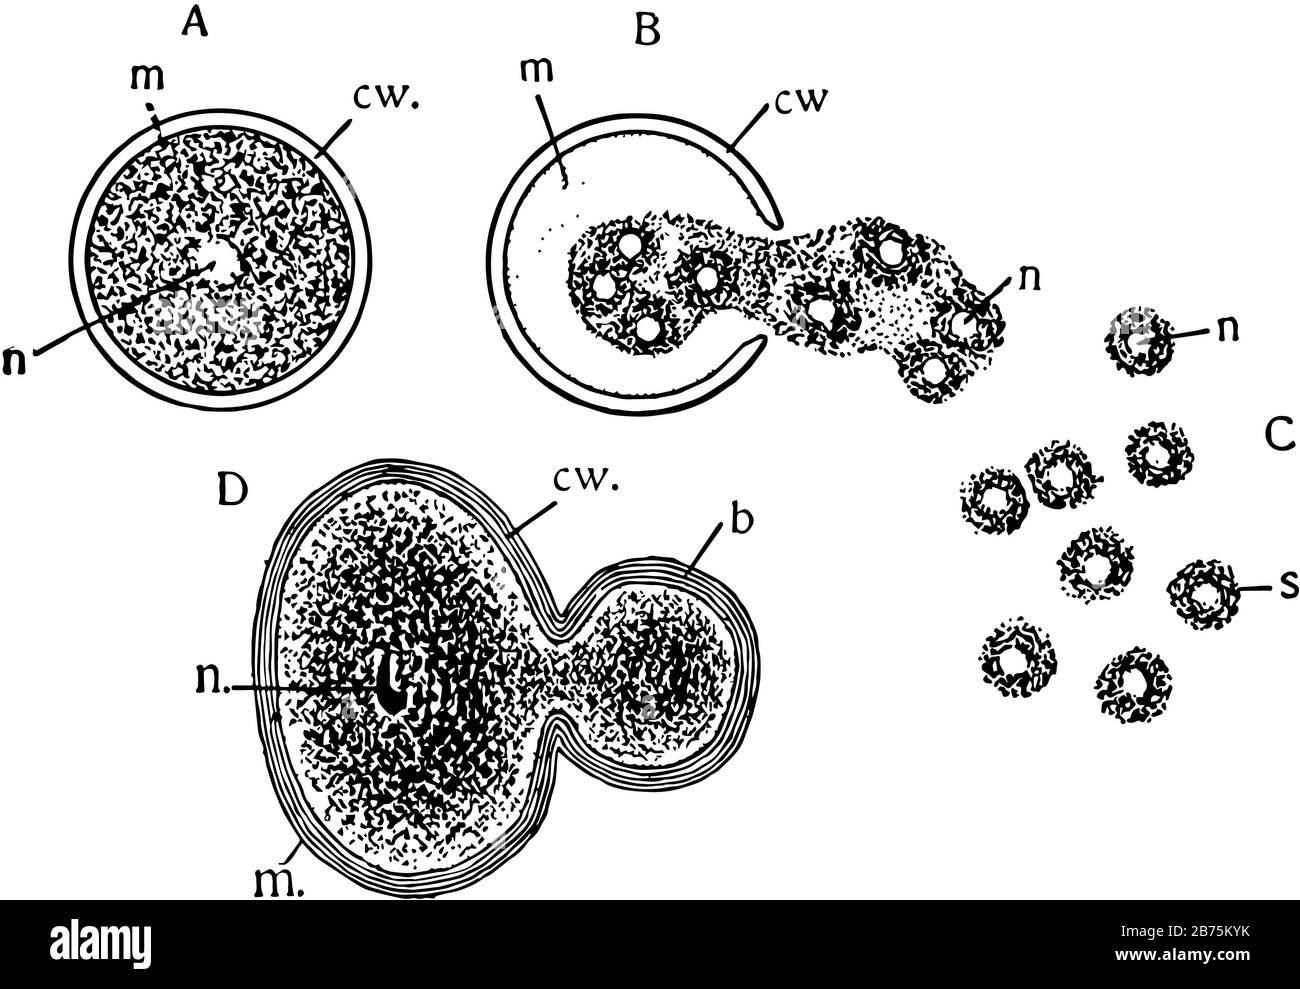 Cell reproduction is the process by which cells divide to form new cells, vintage line drawing or engraving illustration. Stock Vector